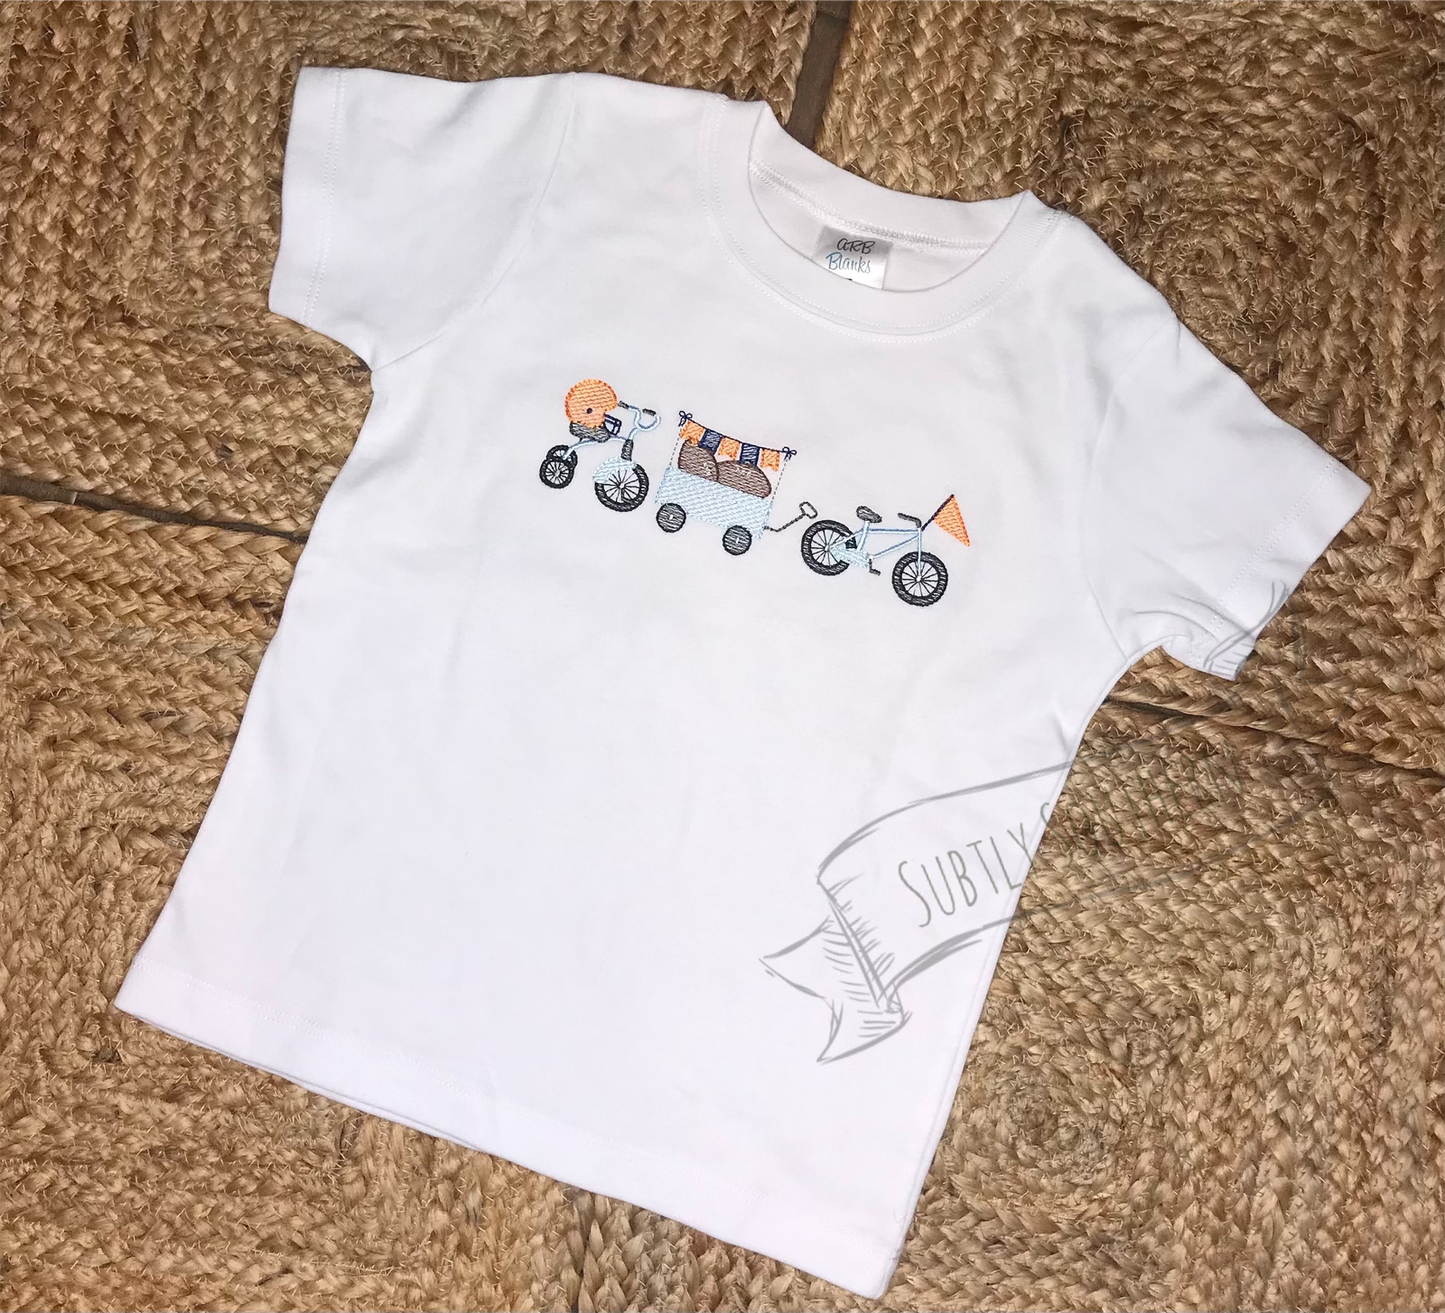 Ready to ship! Size 3T - Little Football Parade Shirt